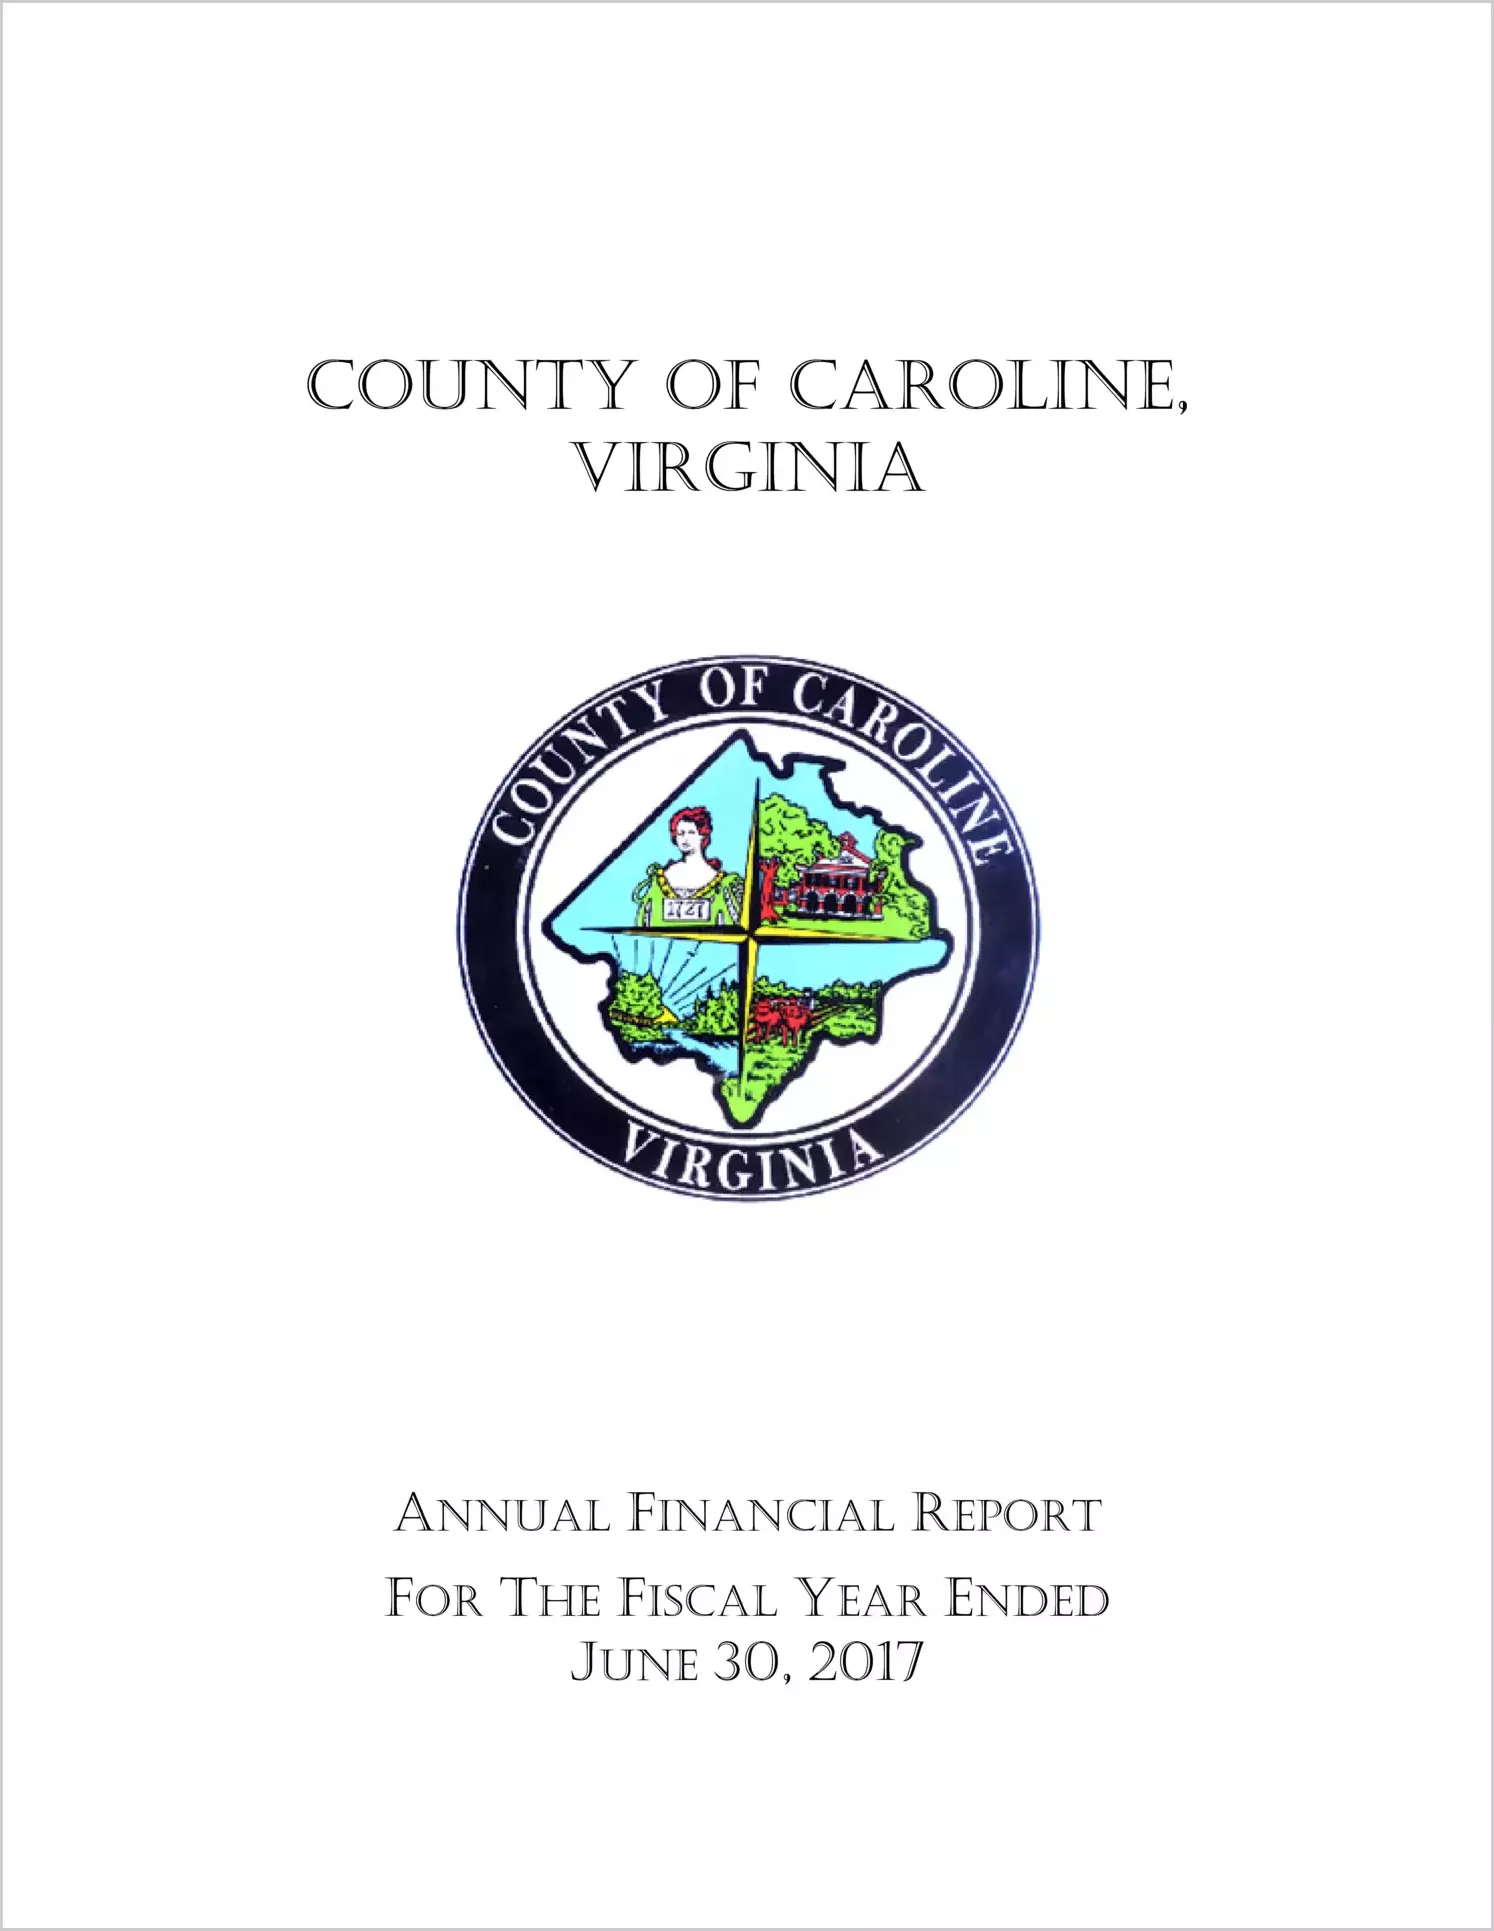 2017 Annual Financial Report for County of Caroline